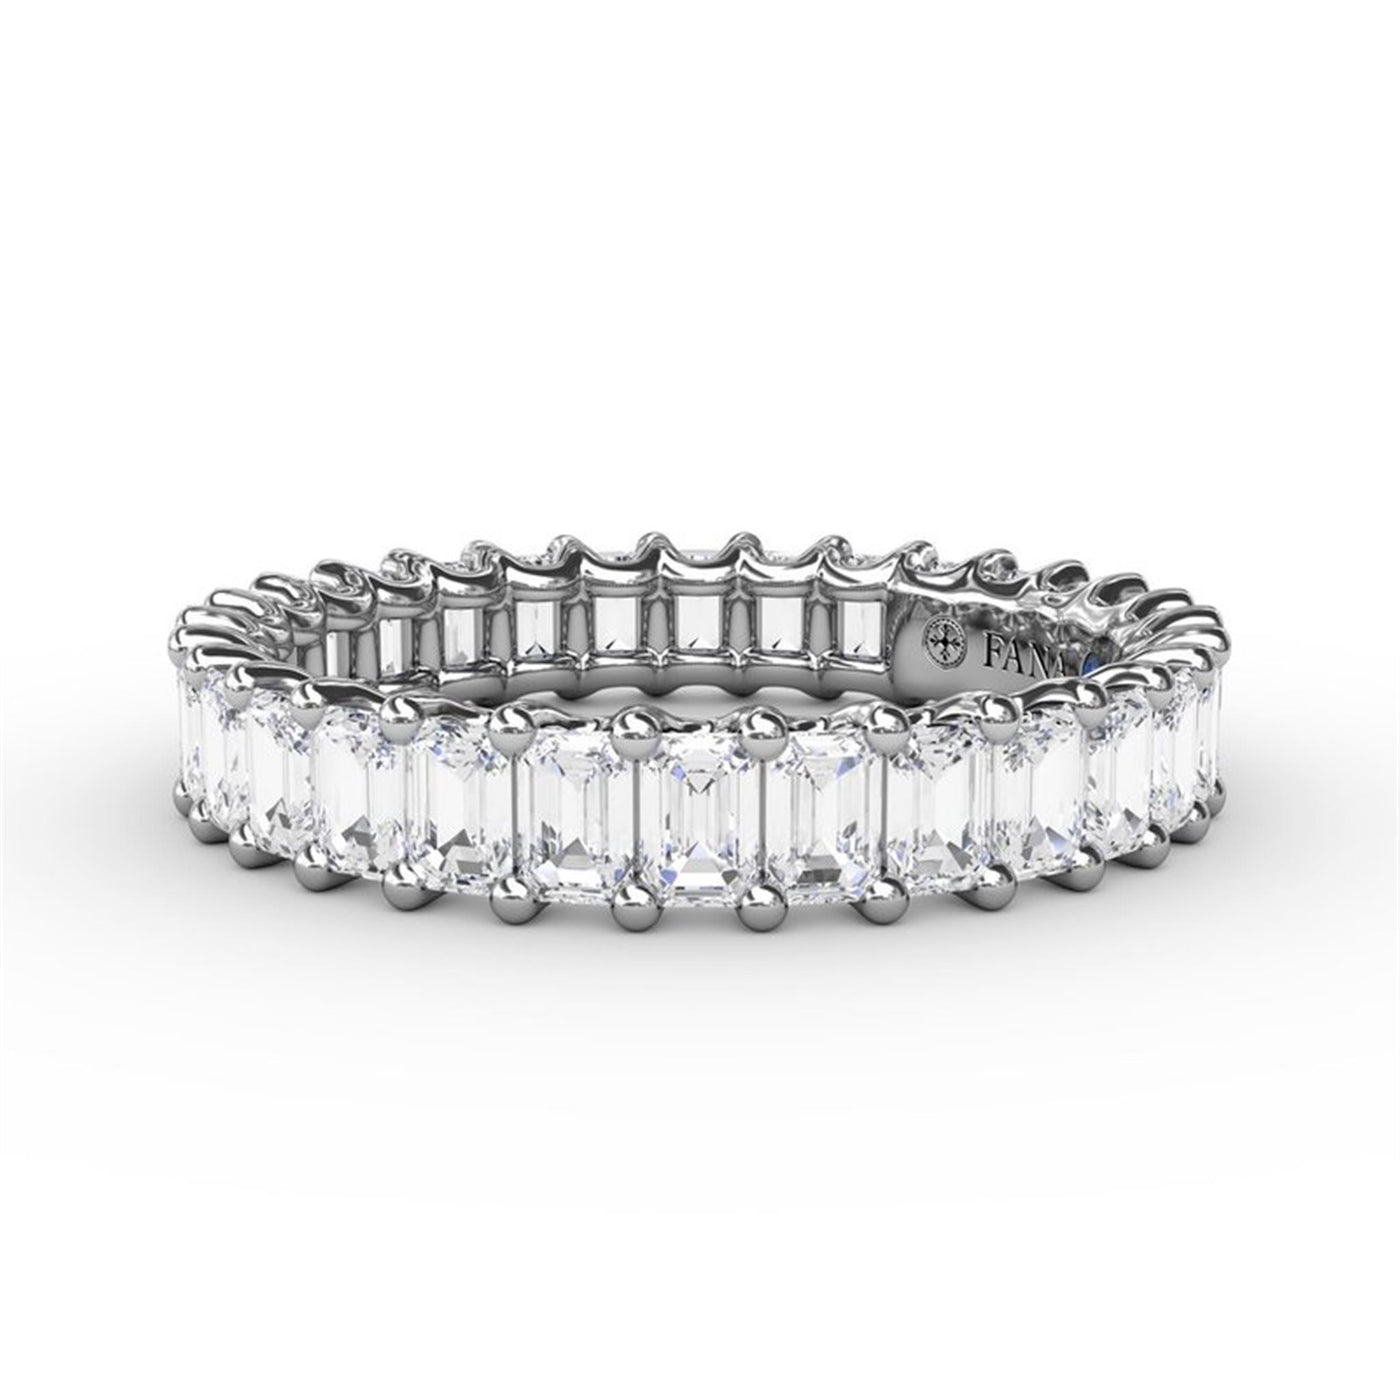 14K White Gold 2.39ctw Diamond Eternity Band 
Featuring a Polished Finish